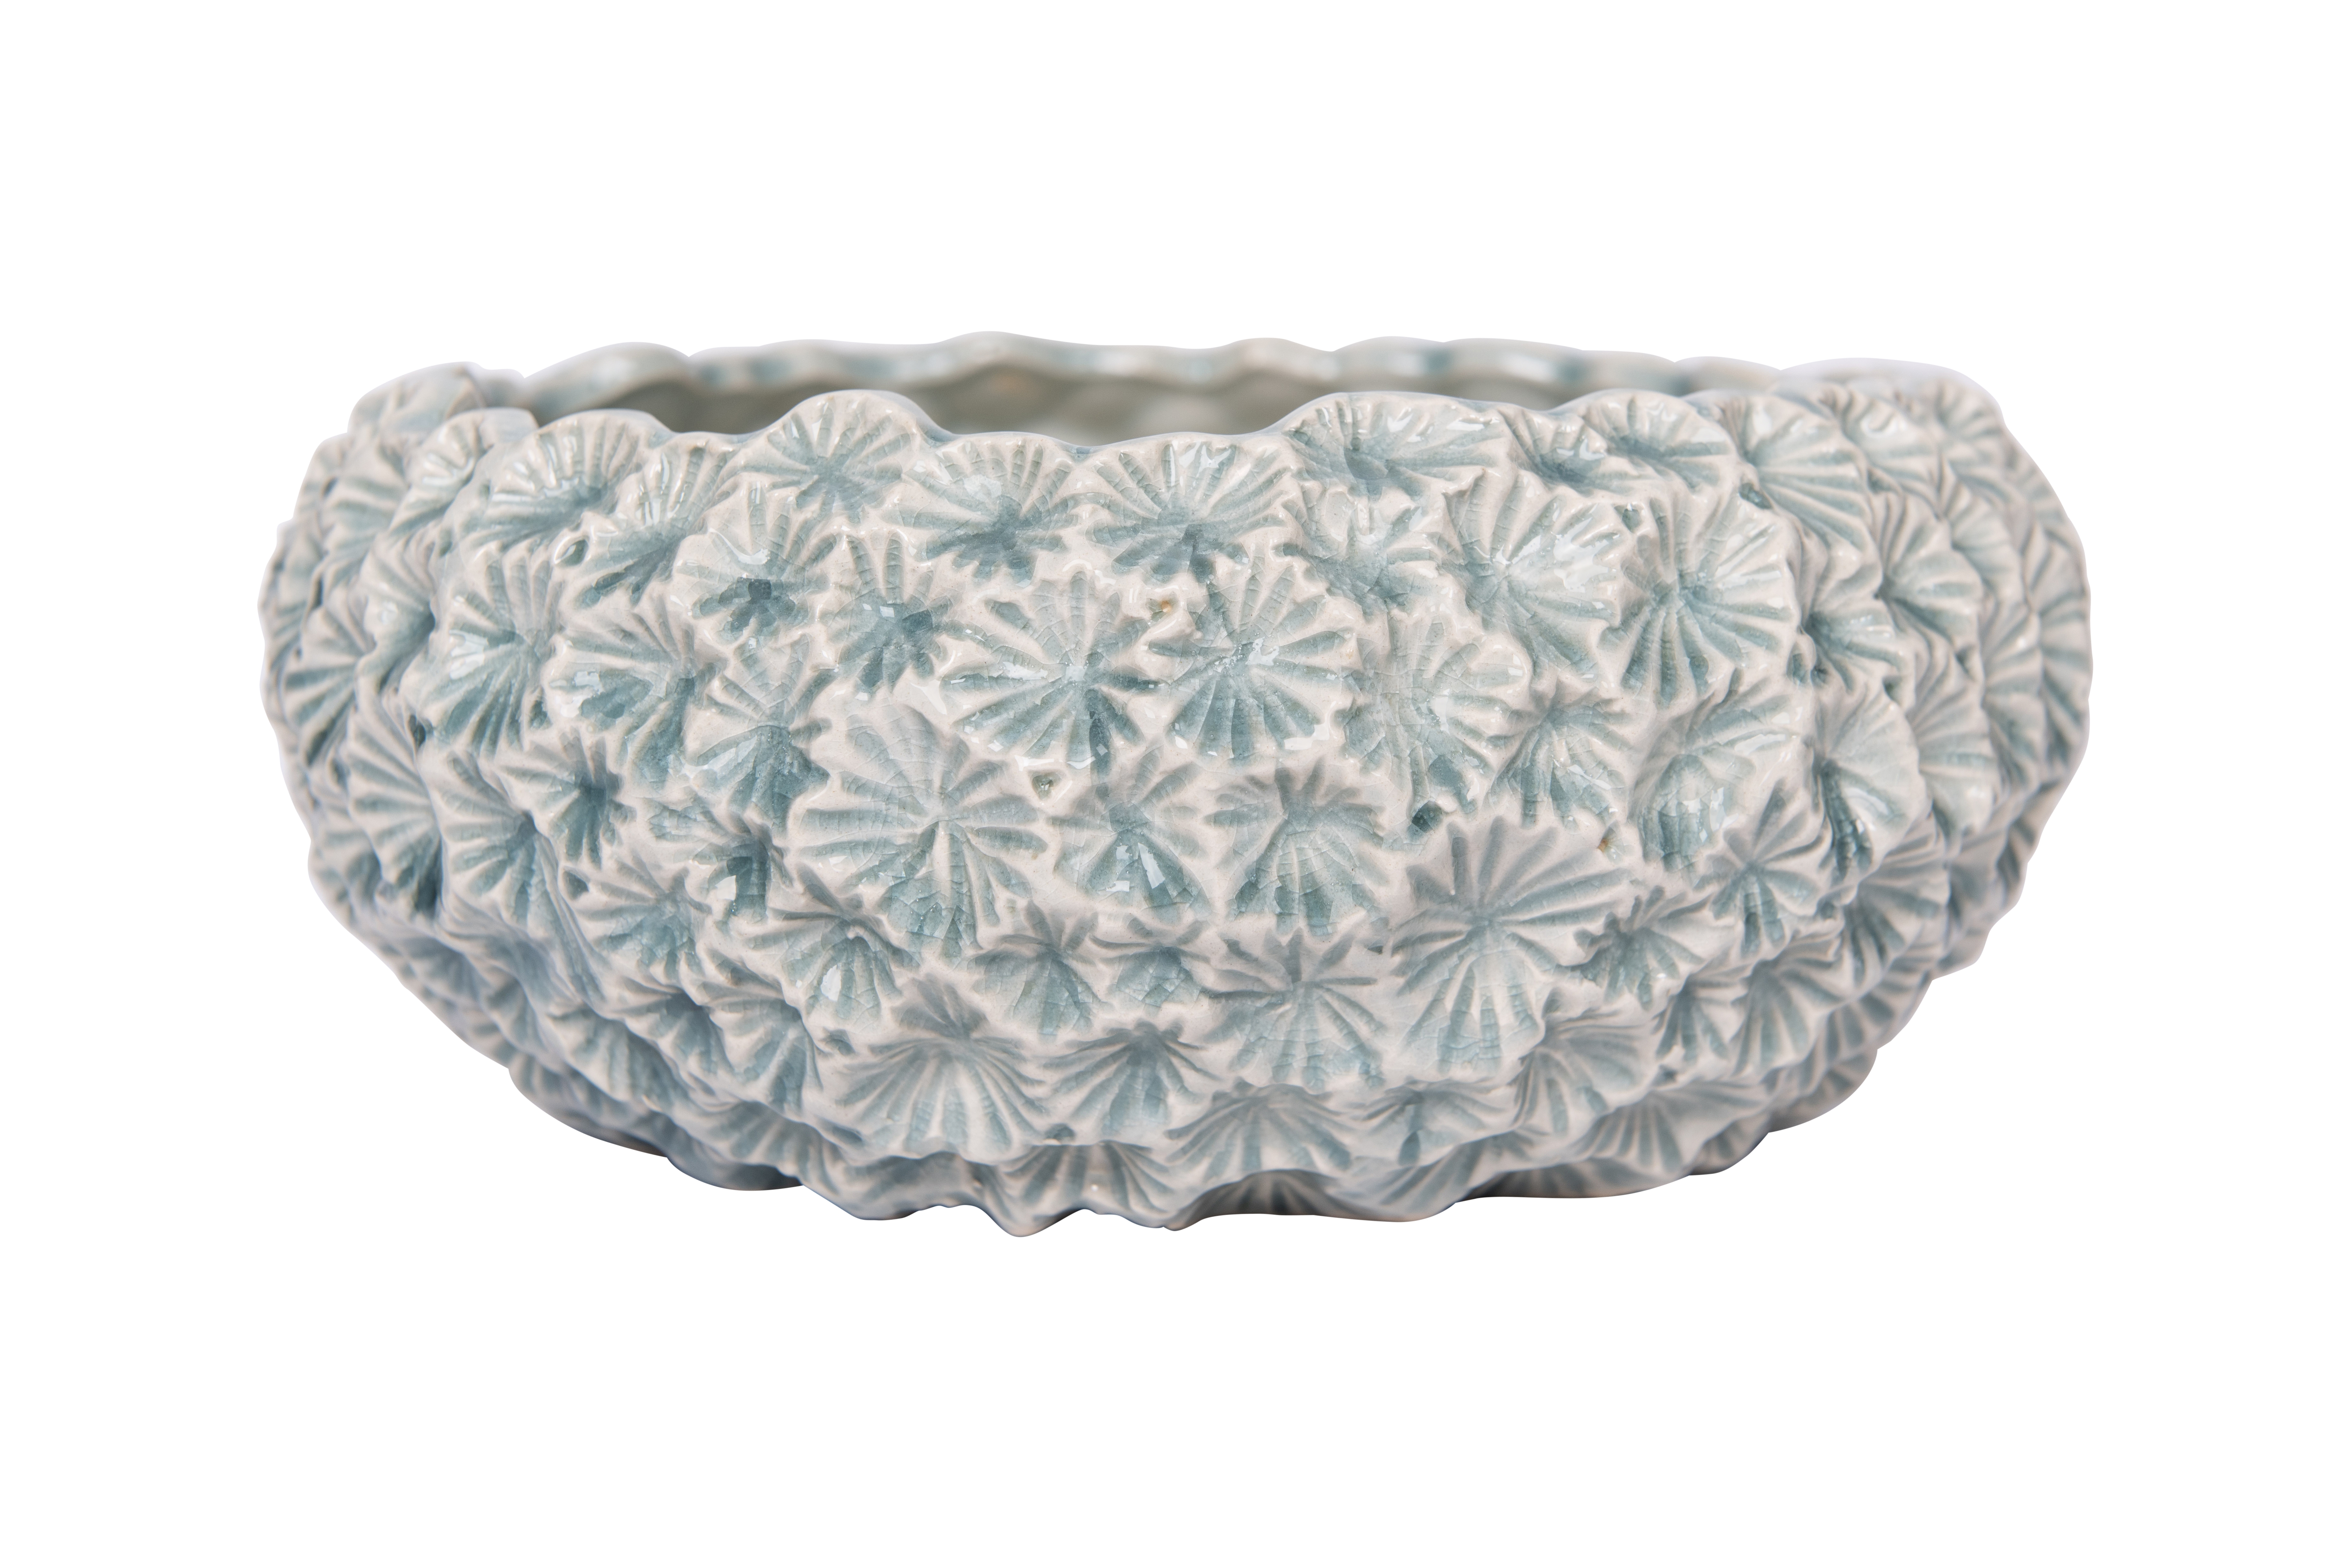 Light Blue Ceramic Planter with Flower Texture - Nomad Home